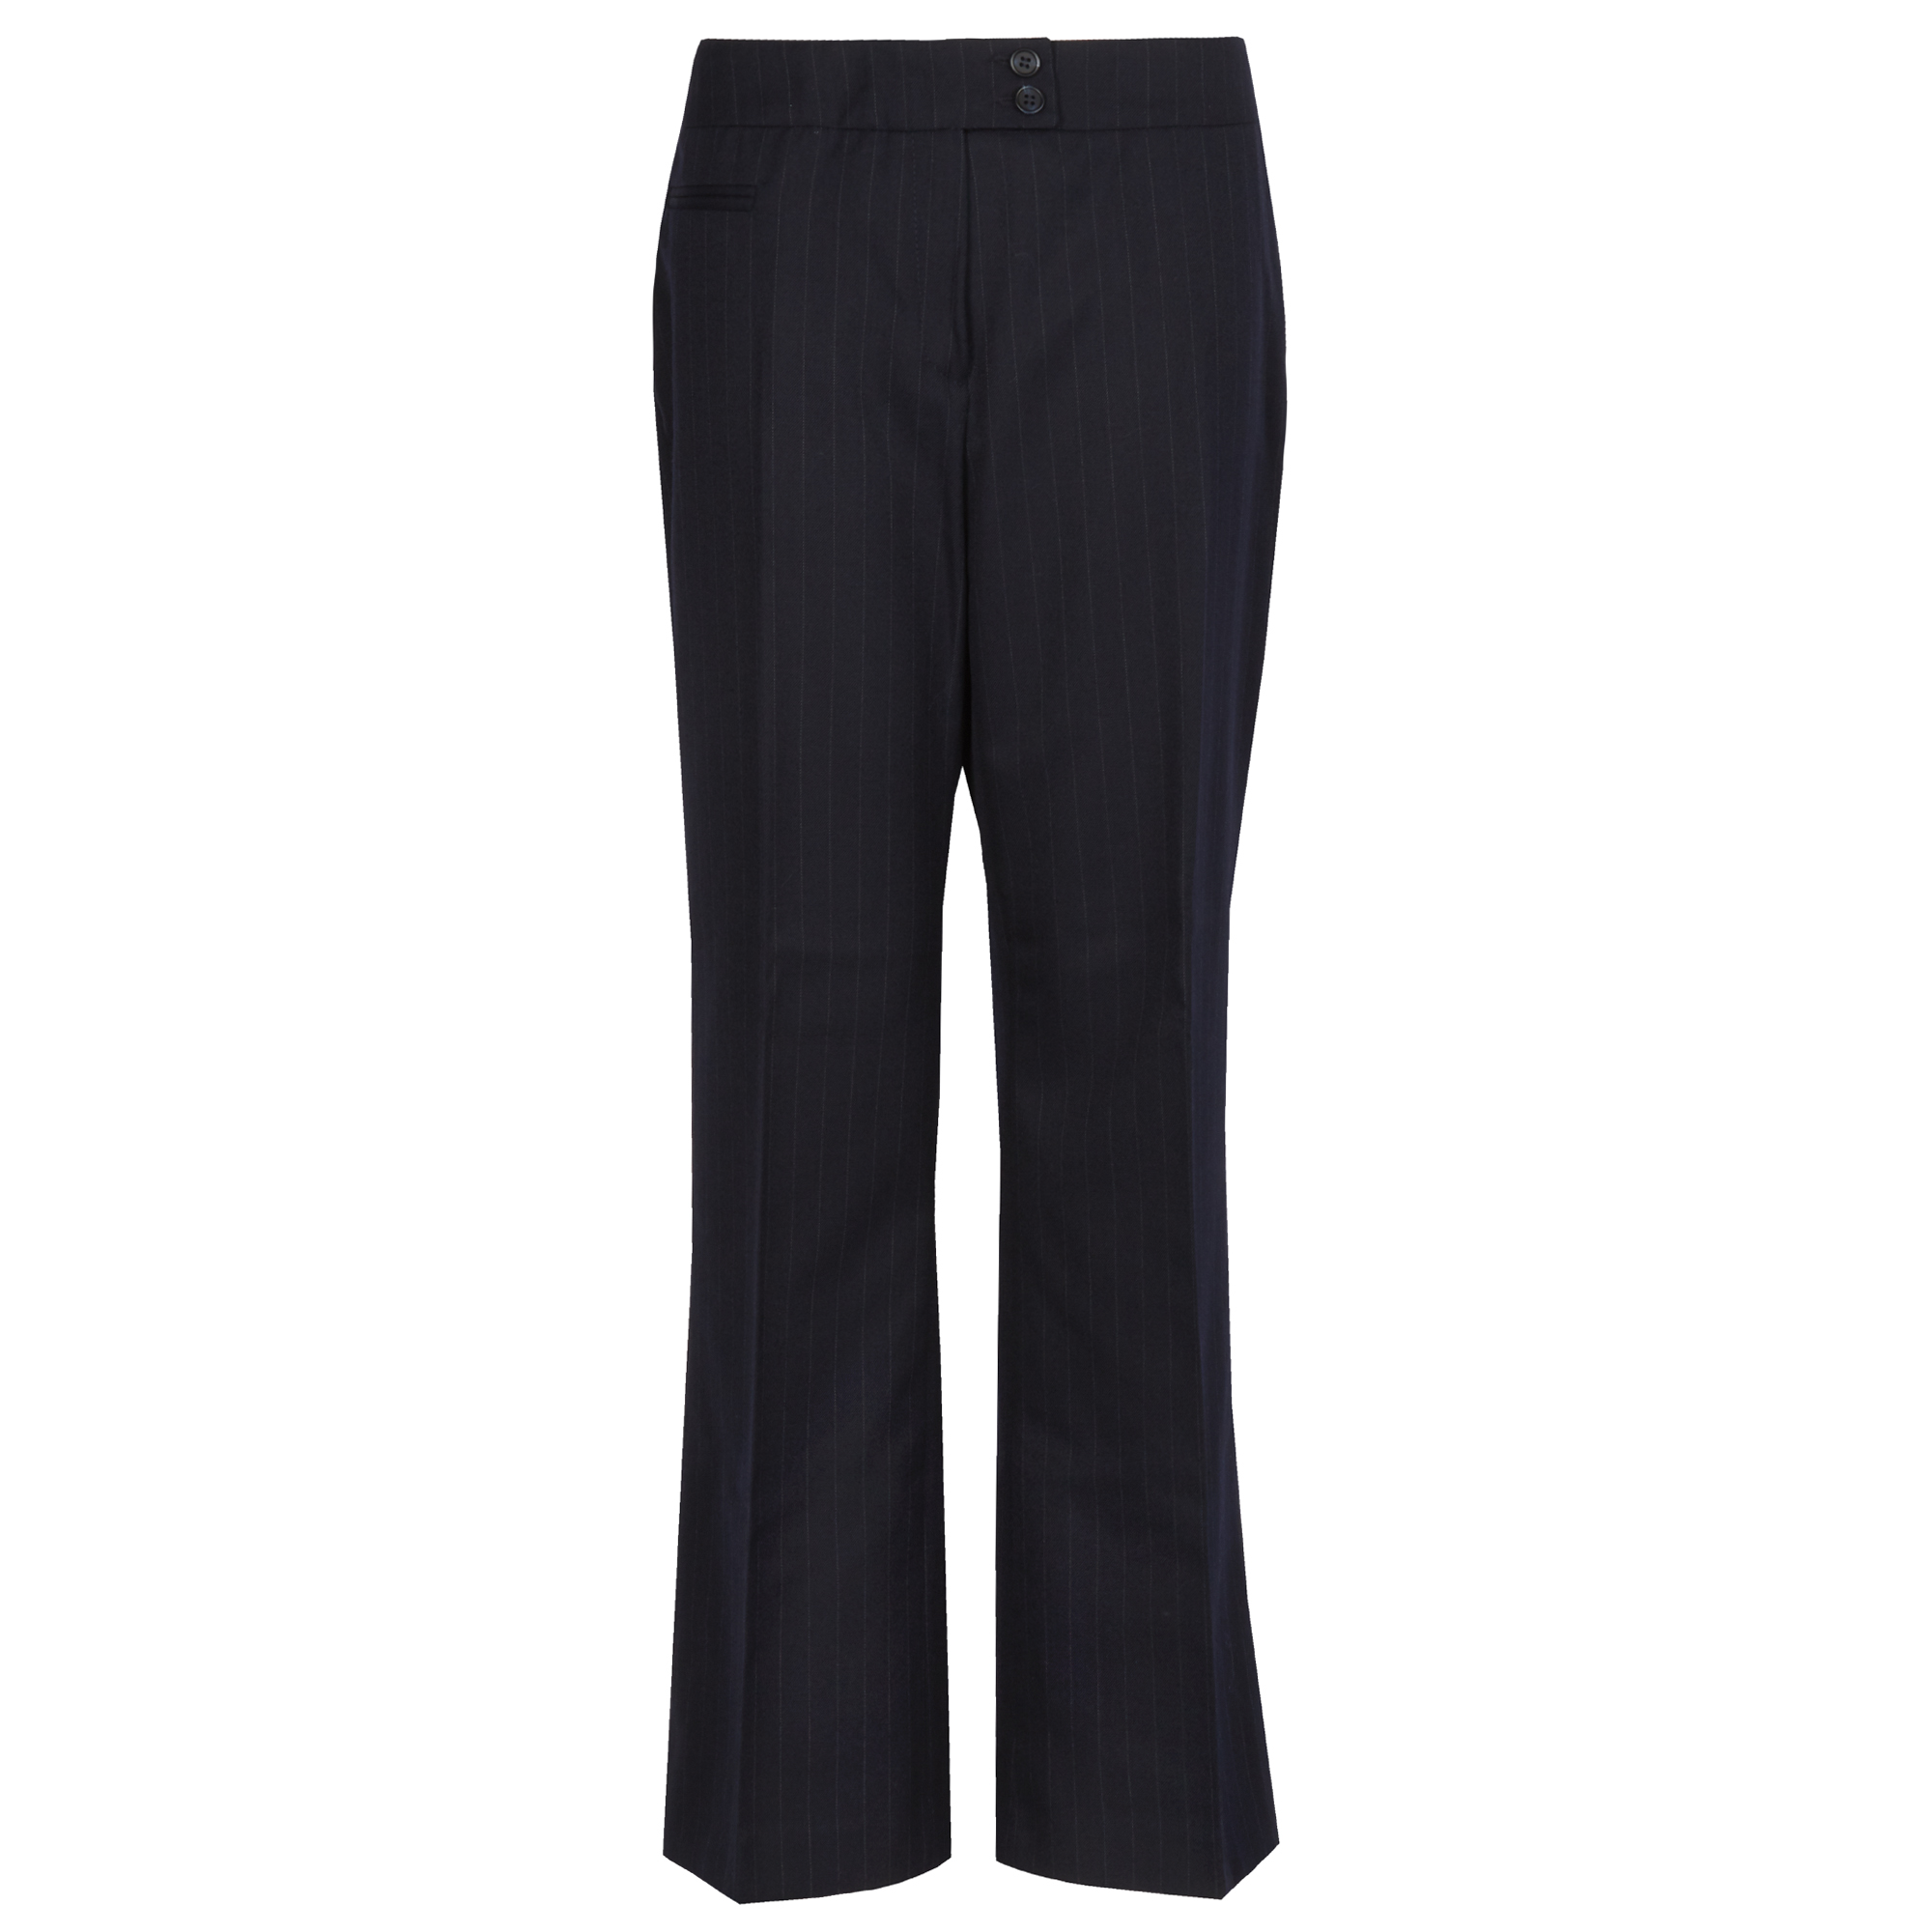 Womens Ladies Formal Office Workwear Business Pants Trousers Classic ...